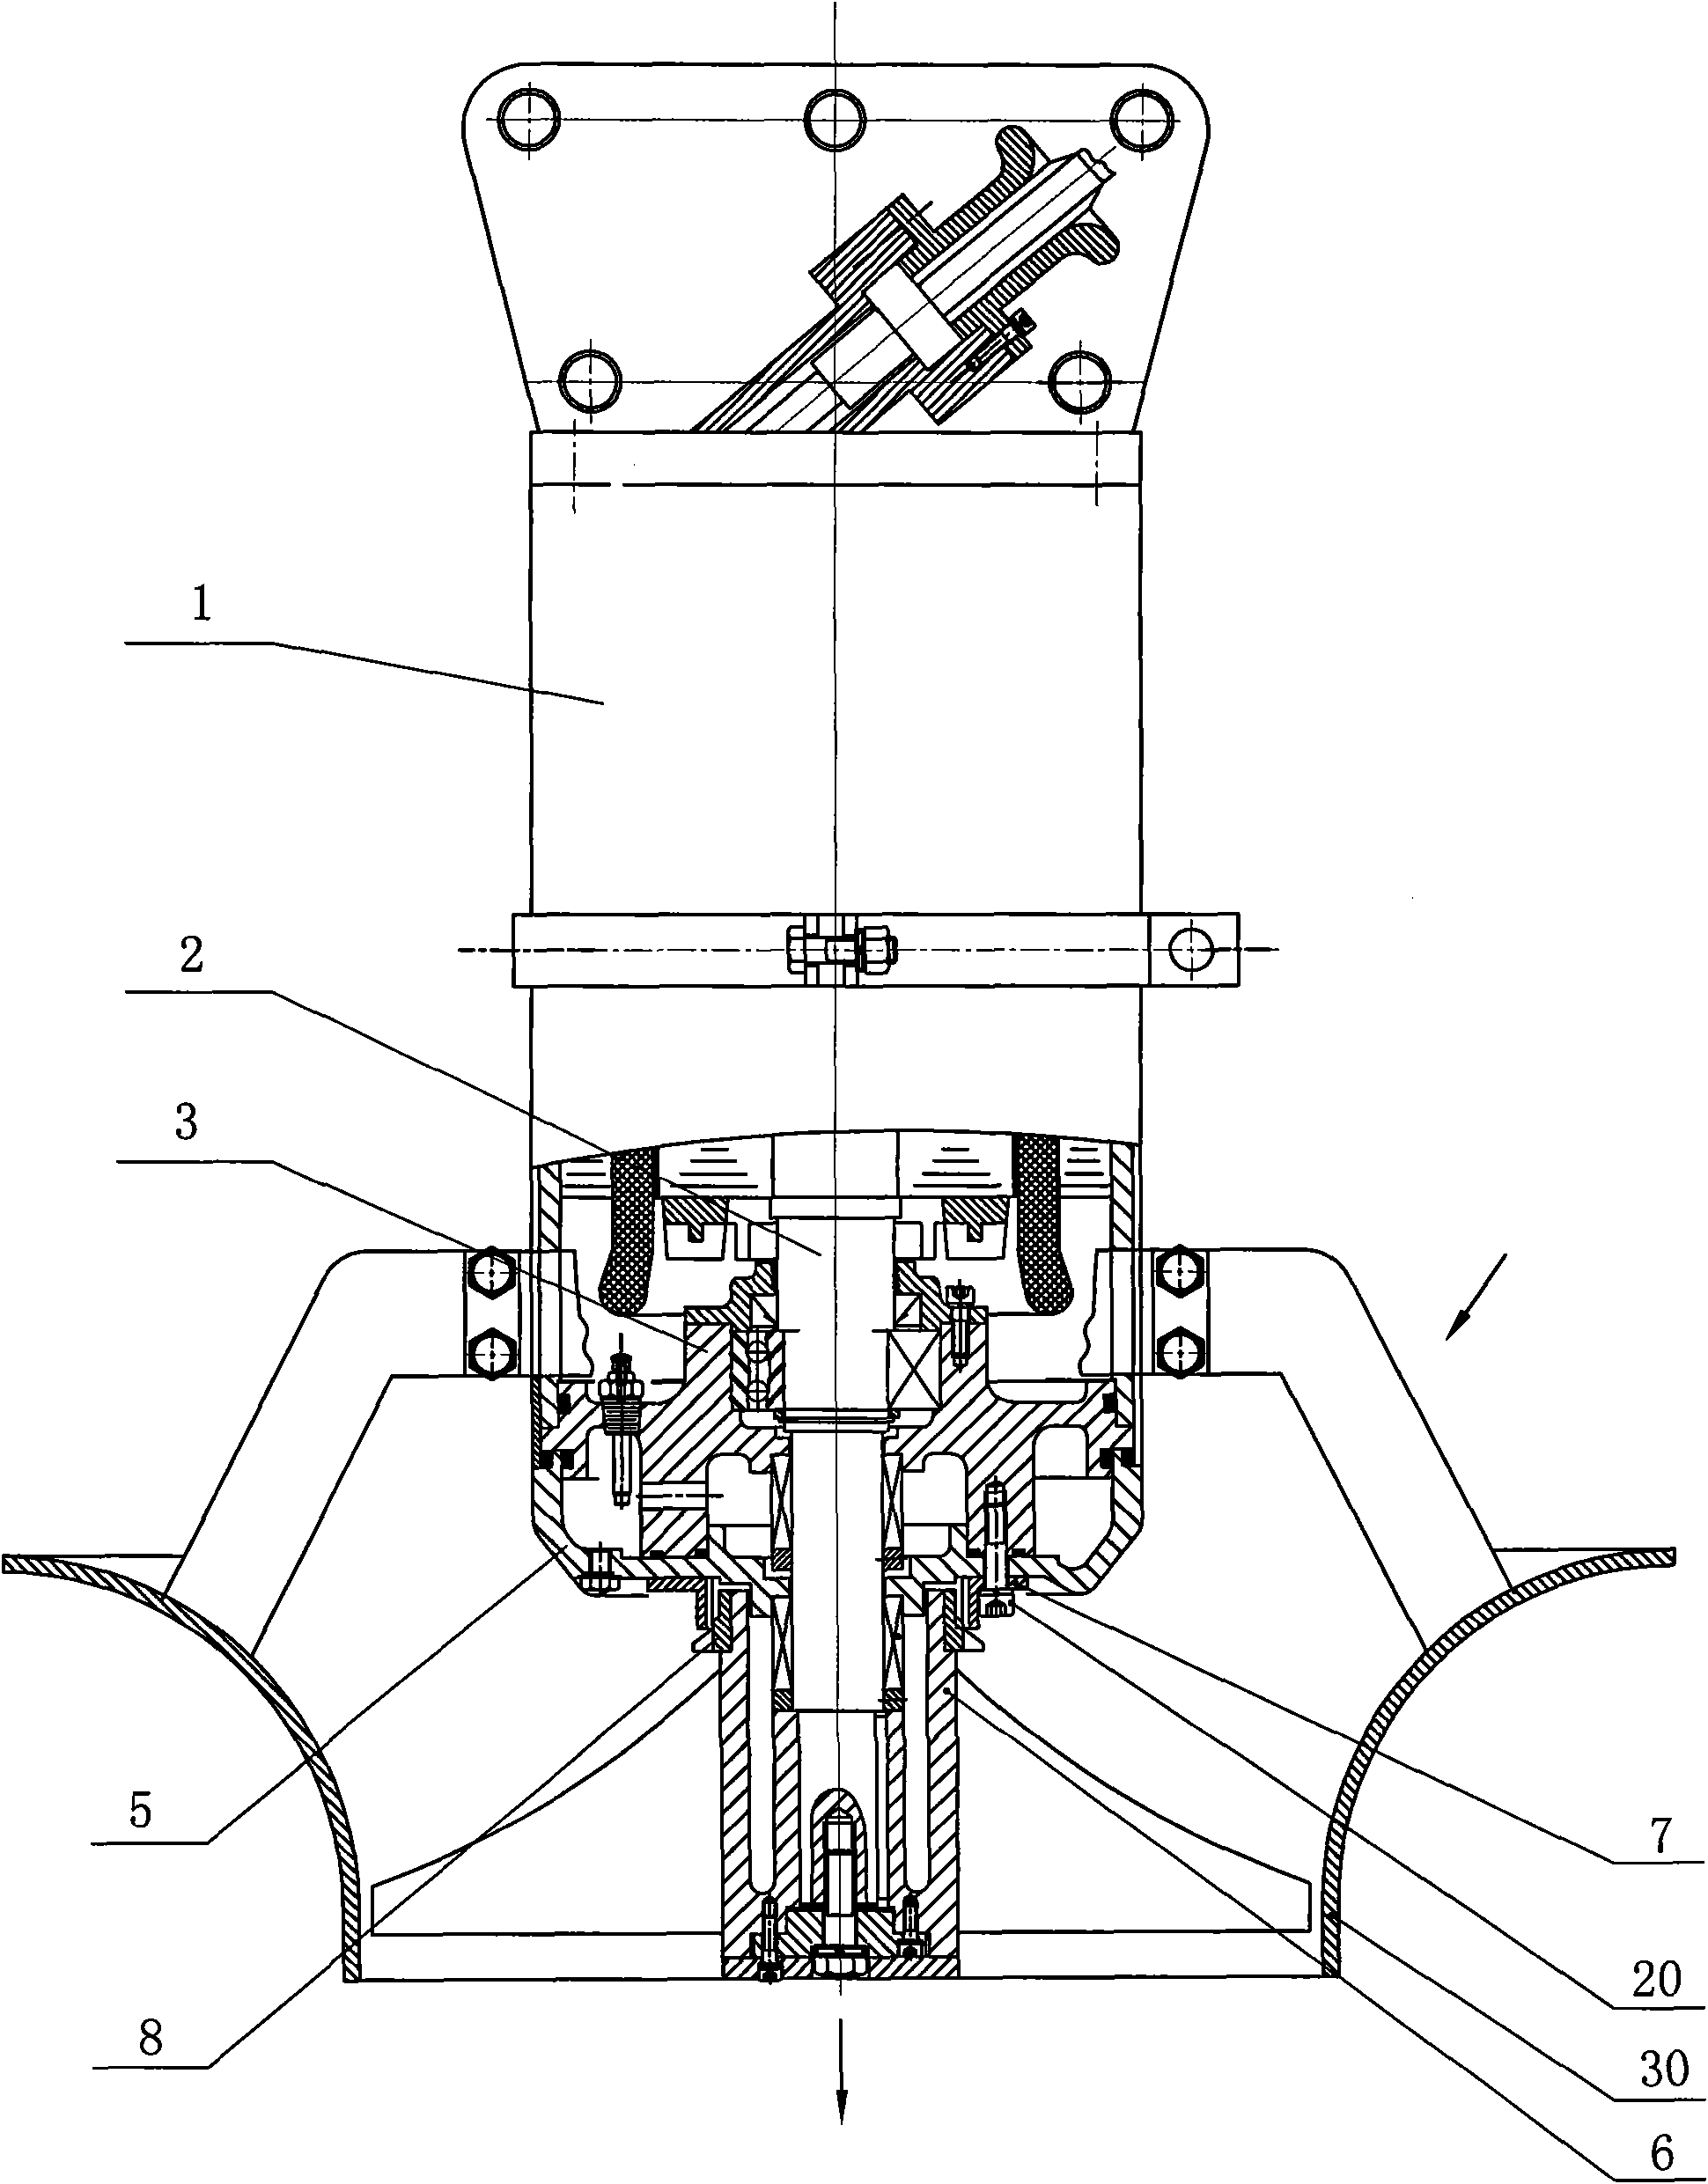 Submersible mixer with cutting function